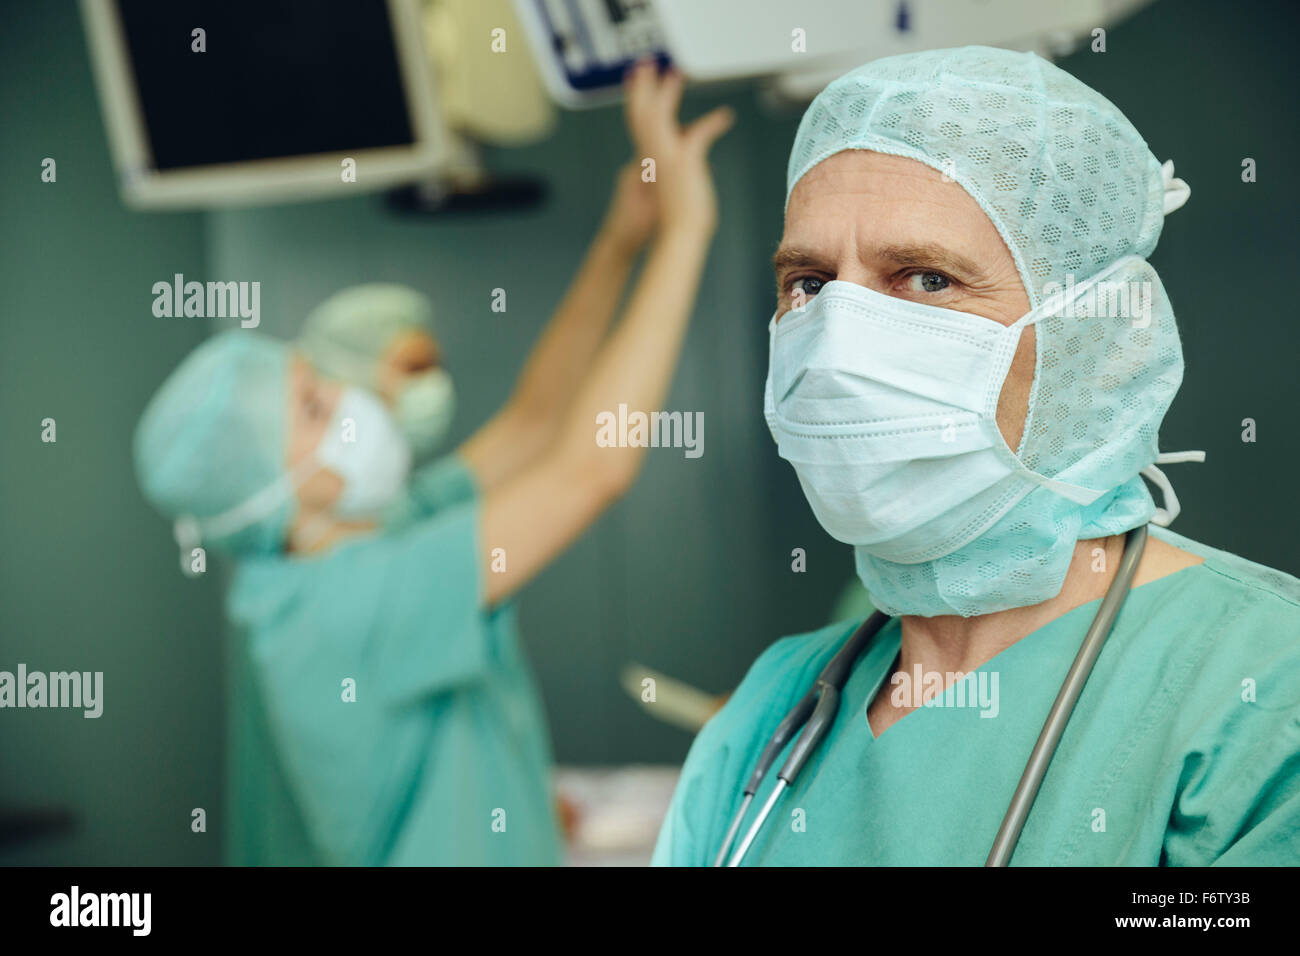 Portrait of surgeon in operating room Banque D'Images